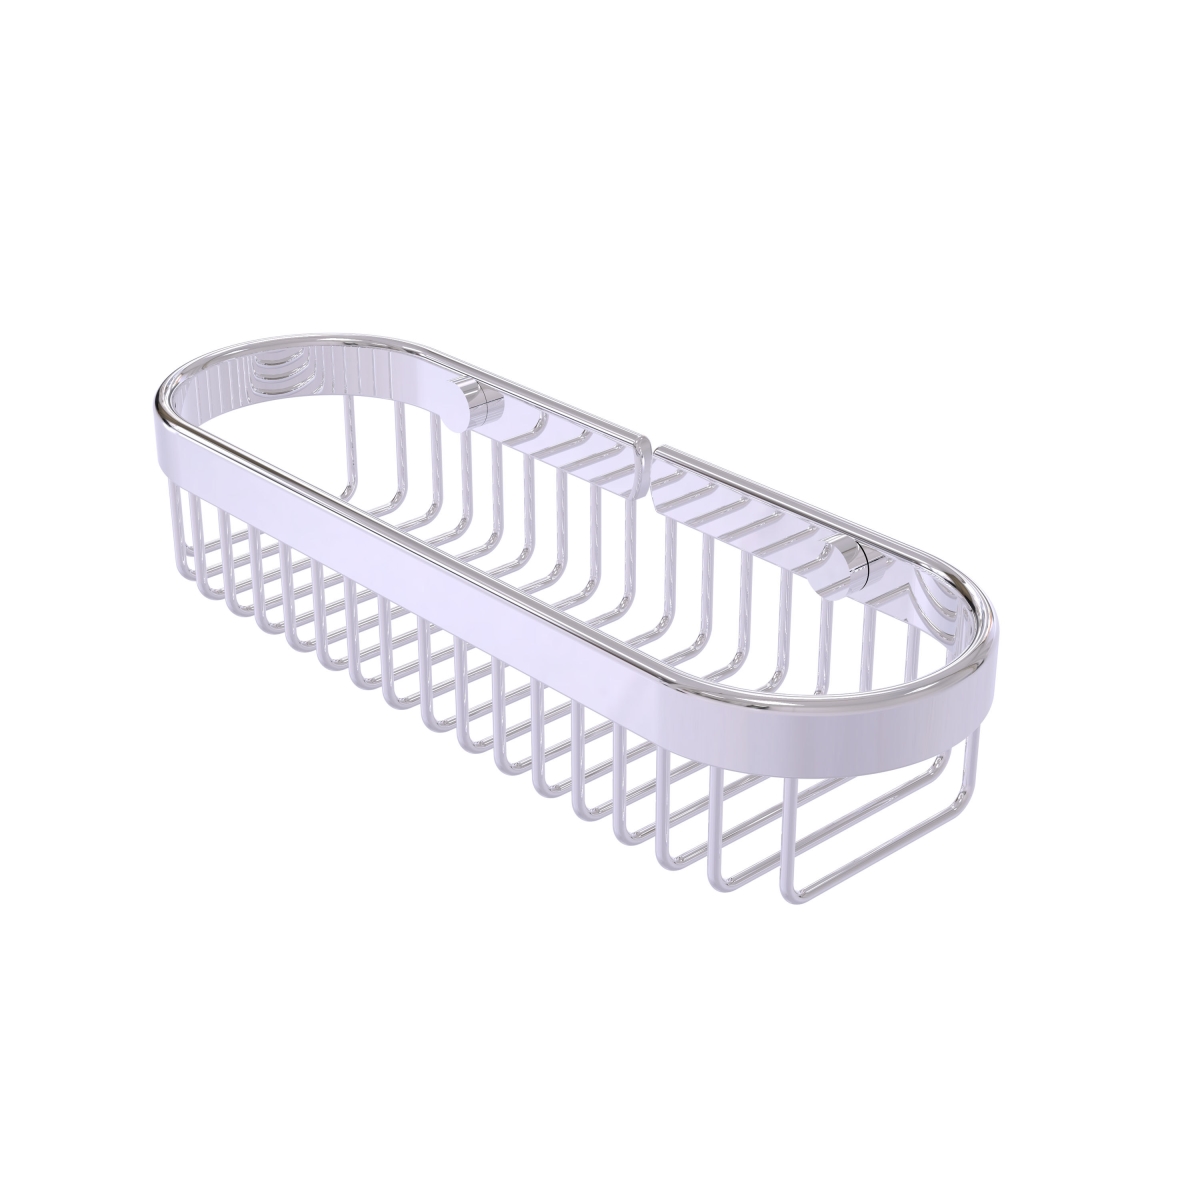 Picture of Allied Brass BSK-200LA-PC Oval Toiletry Wire Basket, Polished Chrome